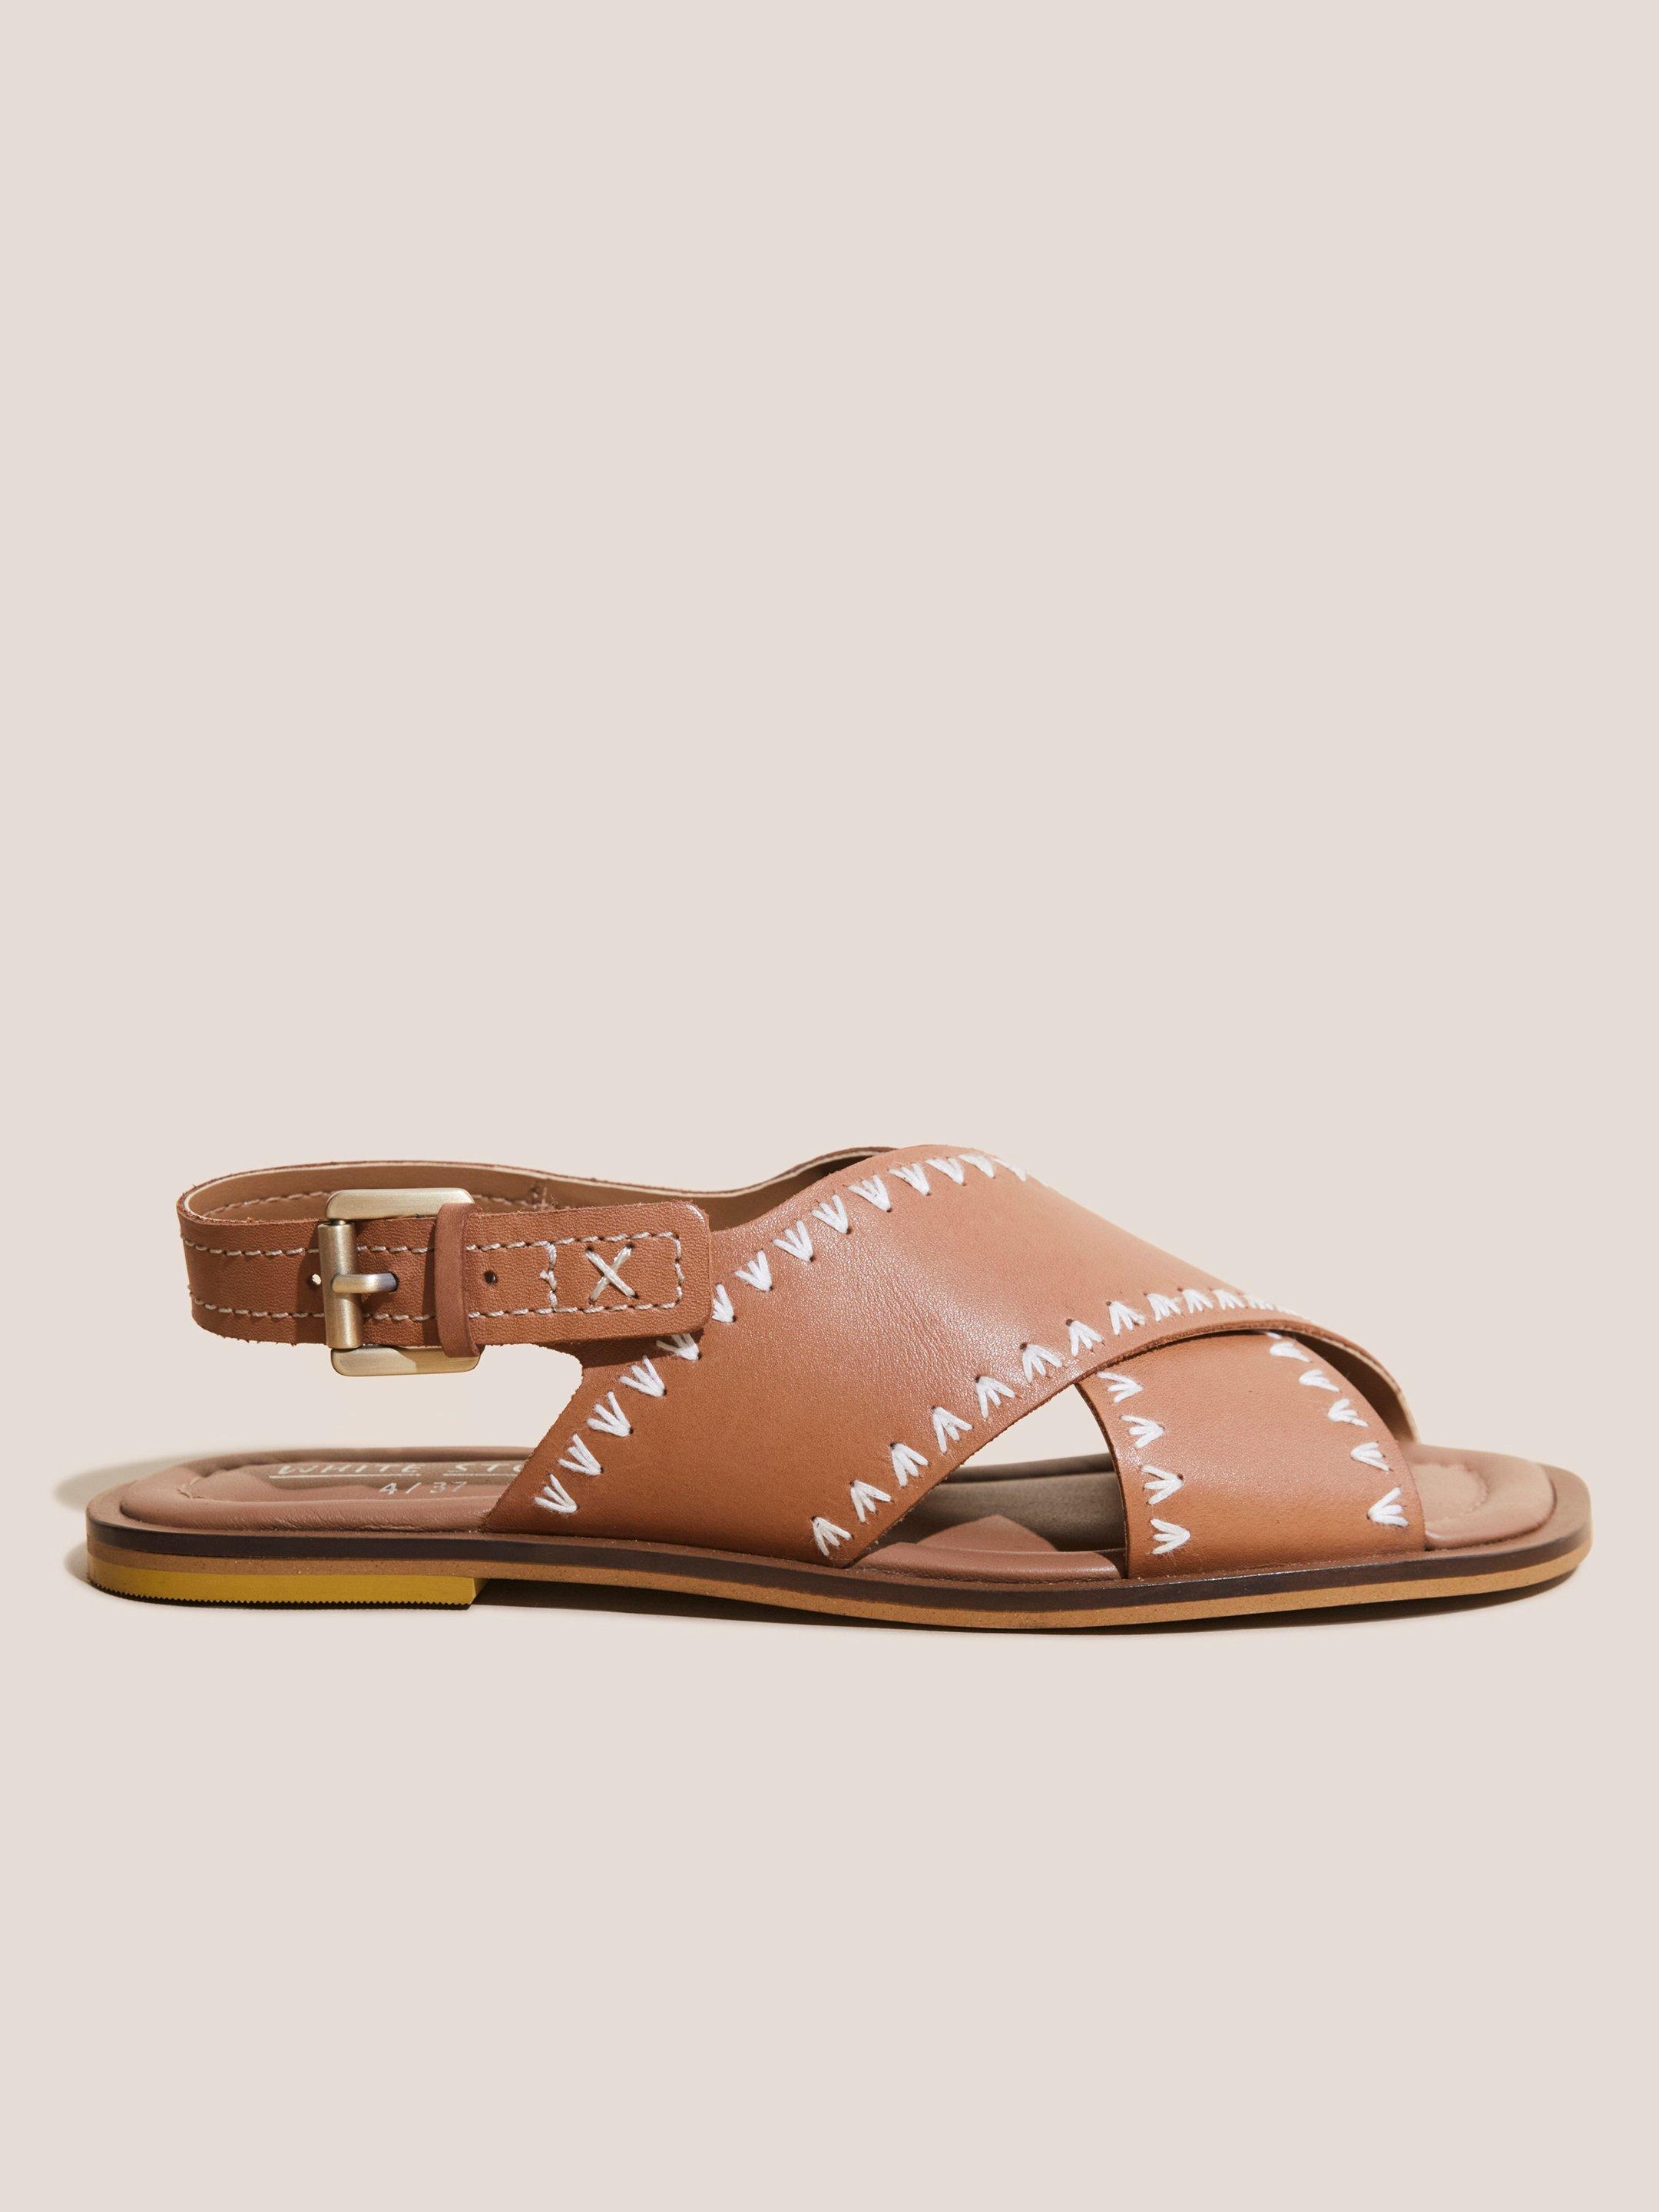 Craft Leather Sandal in MID TAN - MODEL FRONT